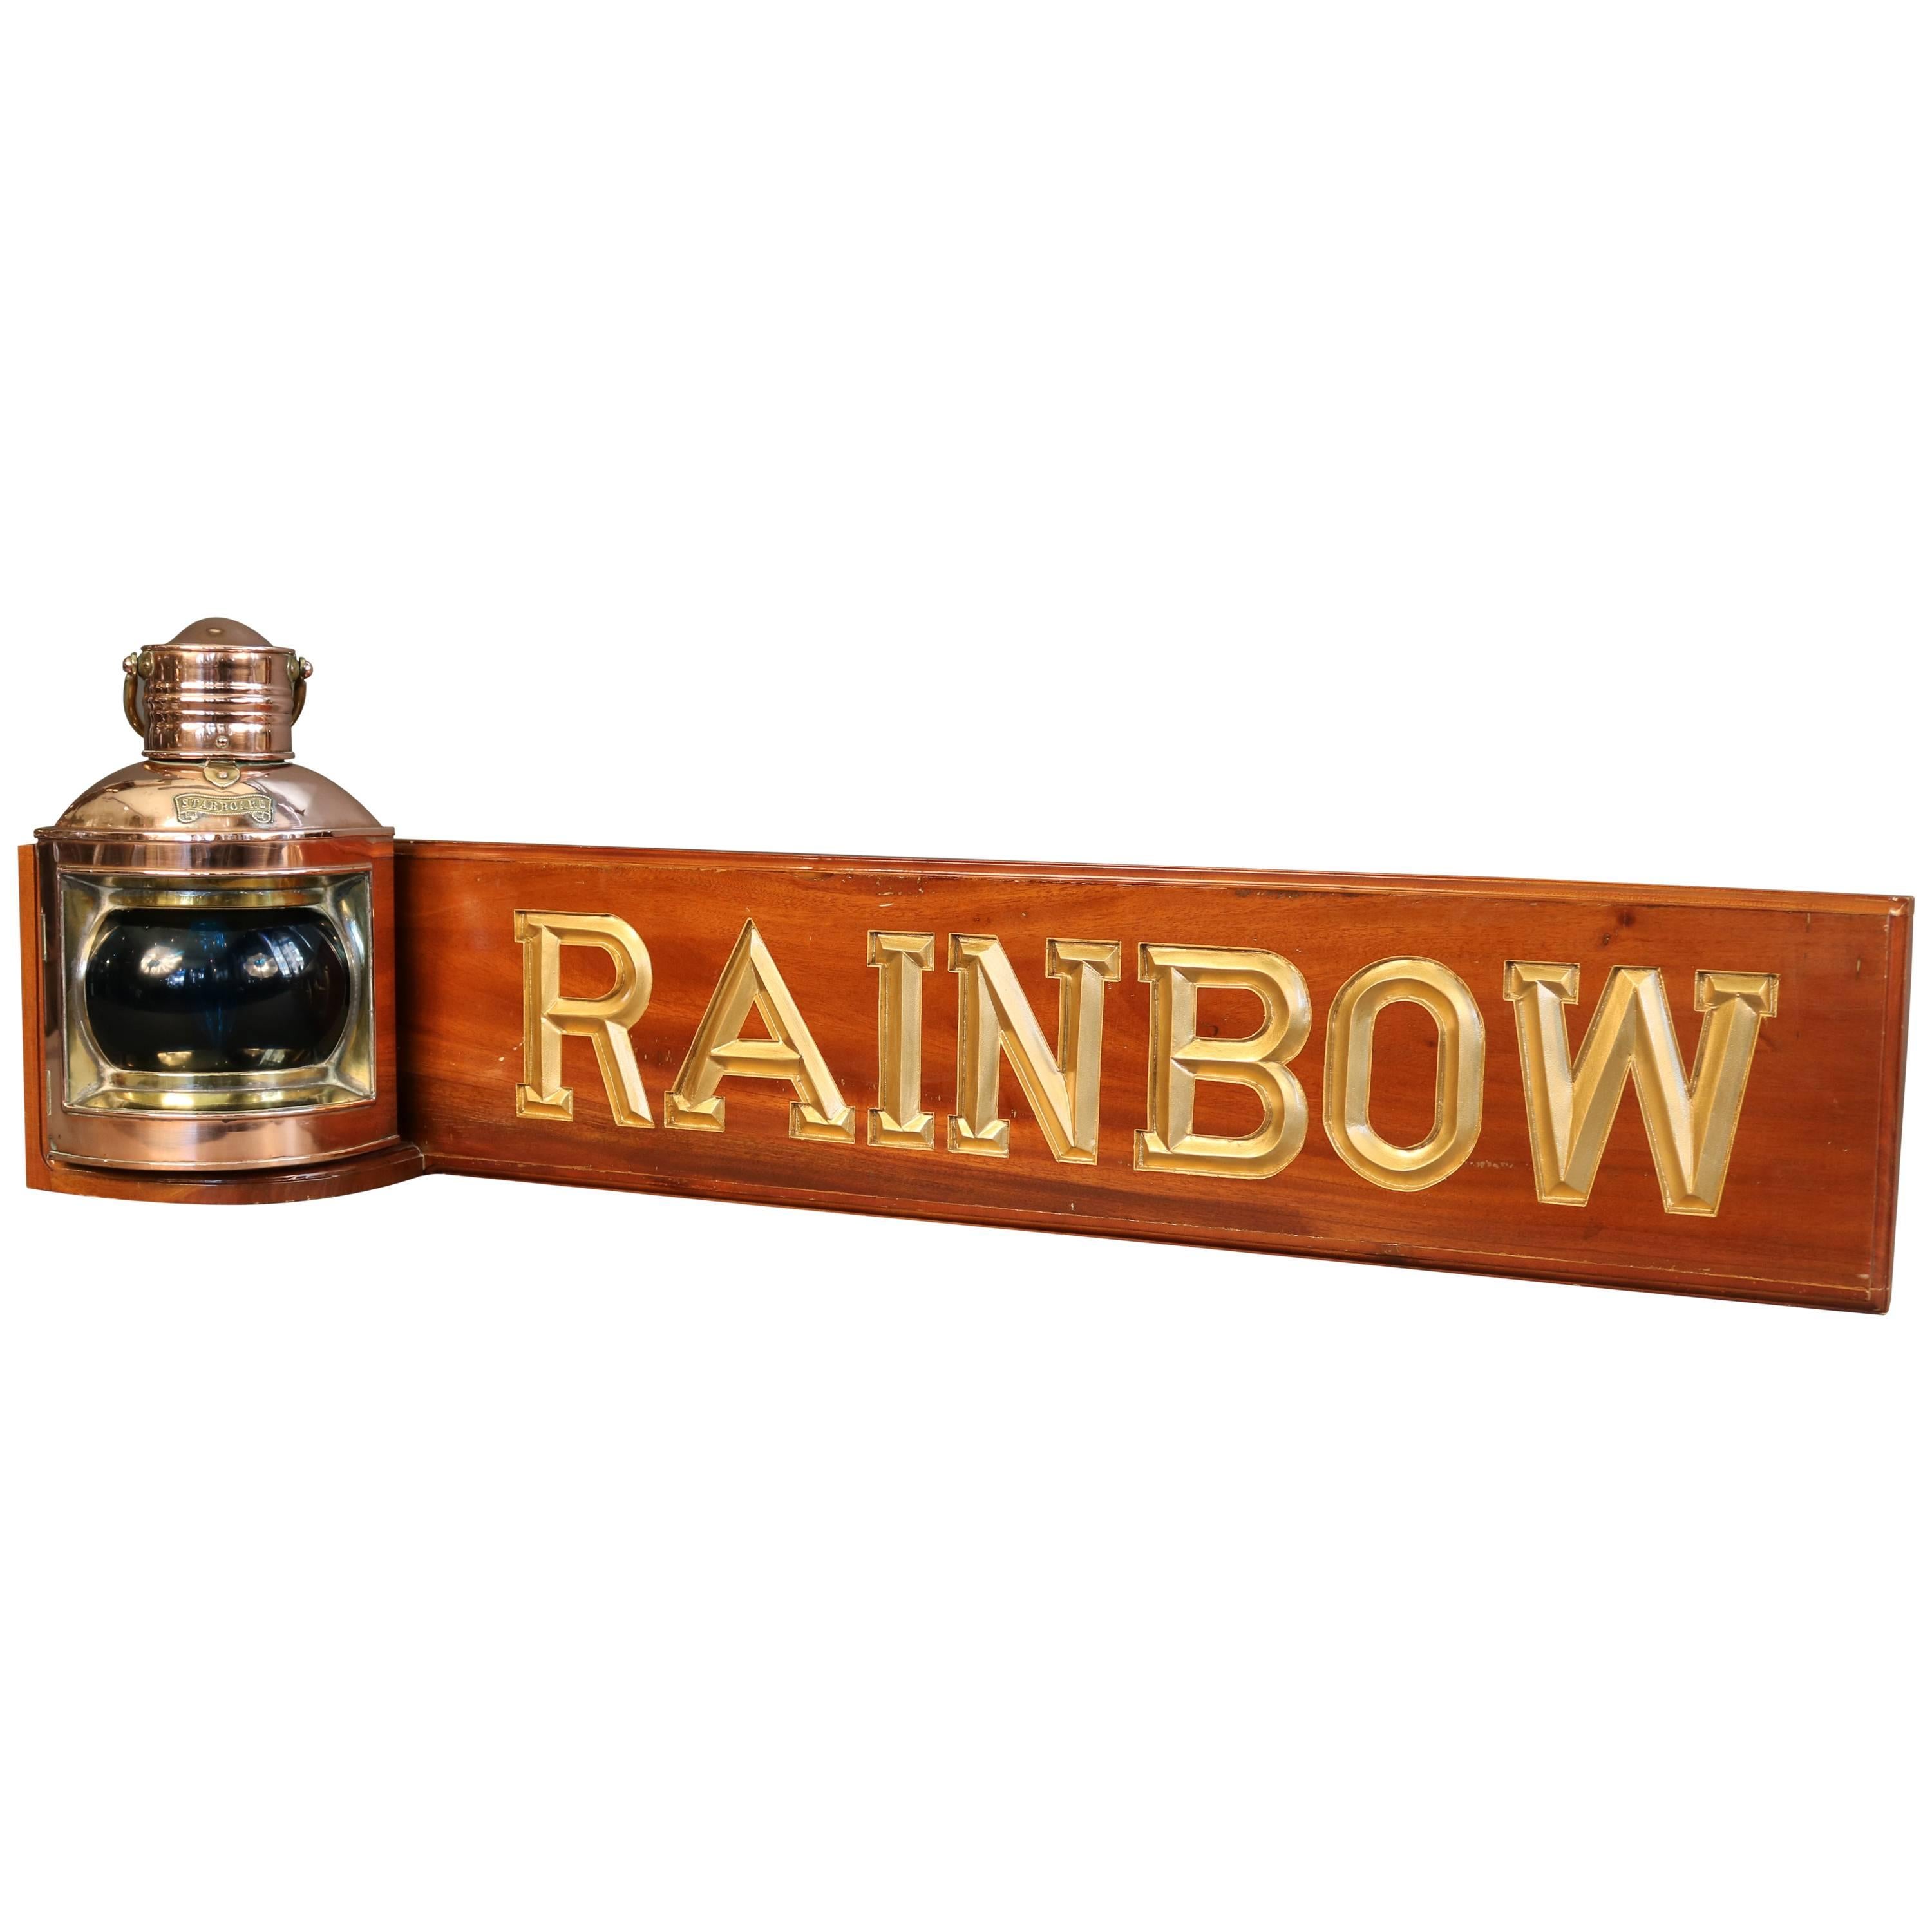 "Rainbow" Nameboard with Antique Light For Sale